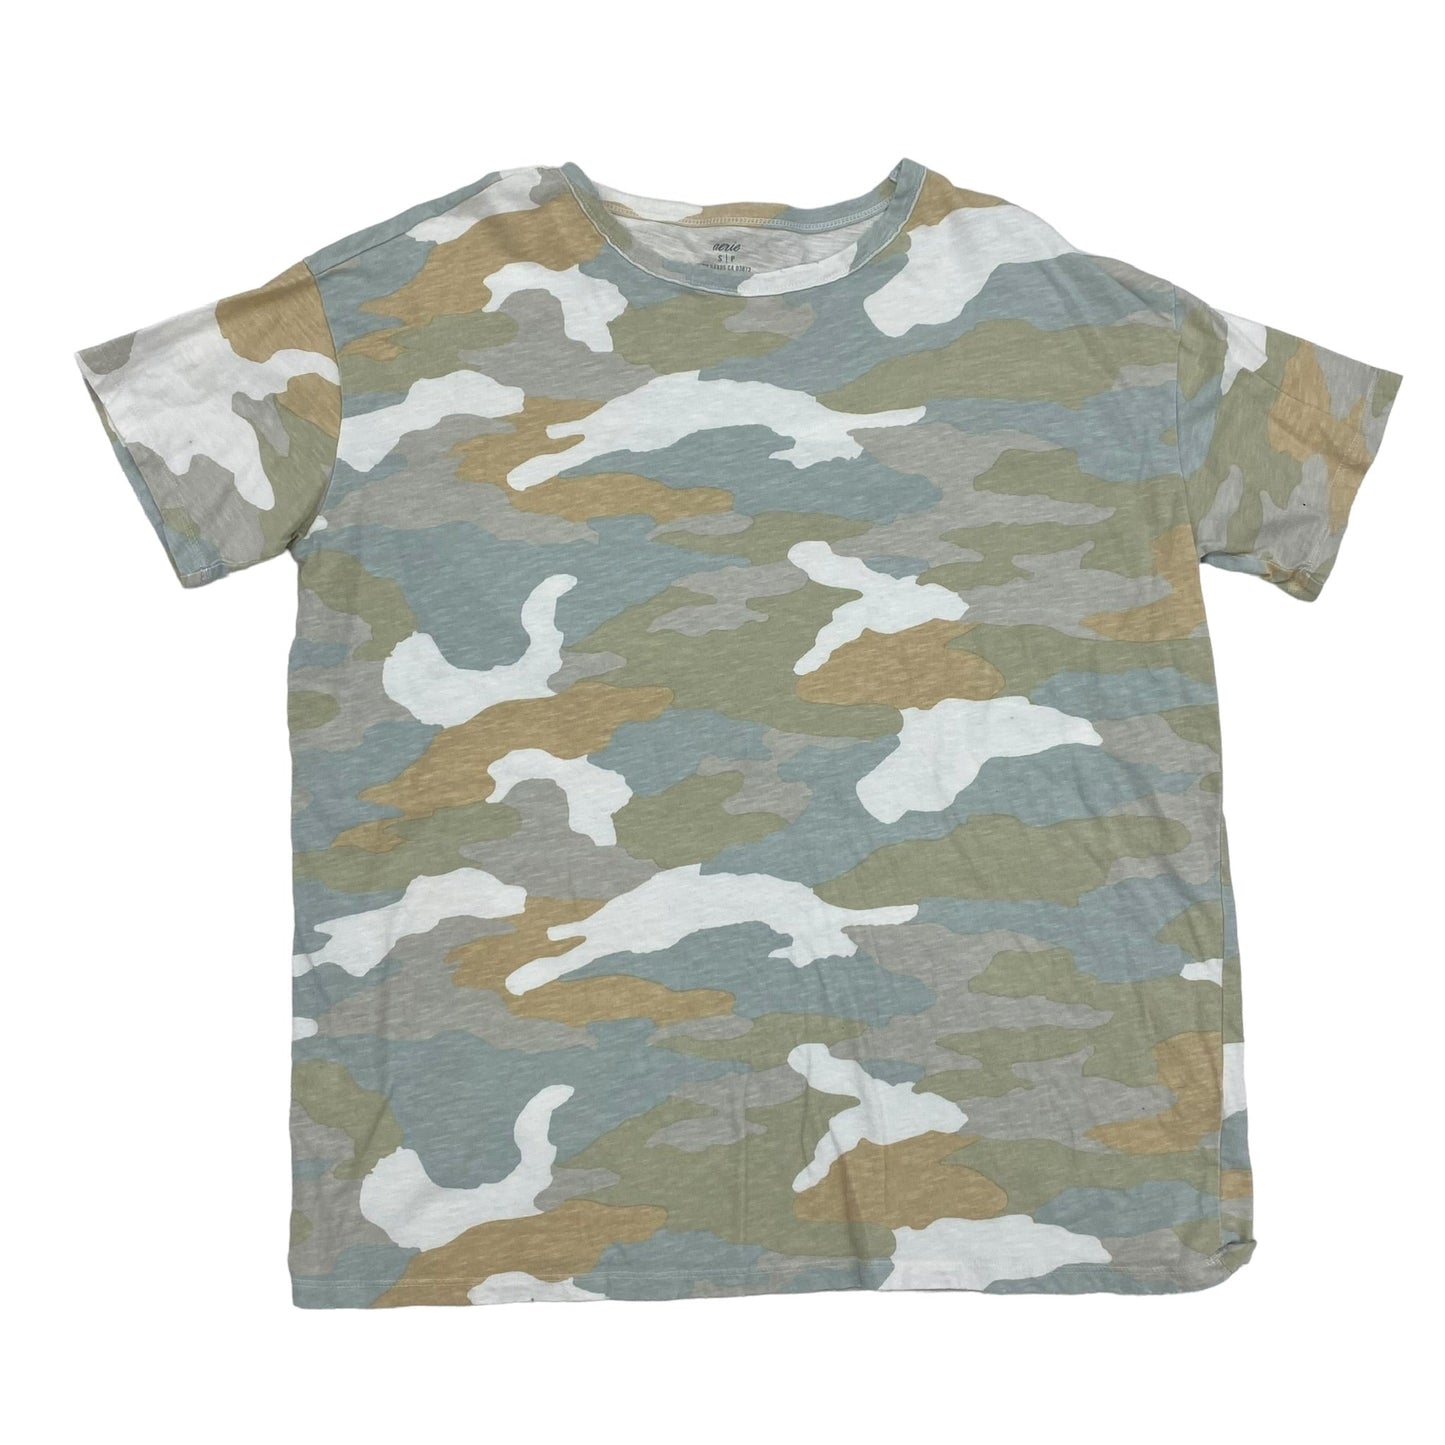 Camouflage Print Top Short Sleeve Aerie, Size S